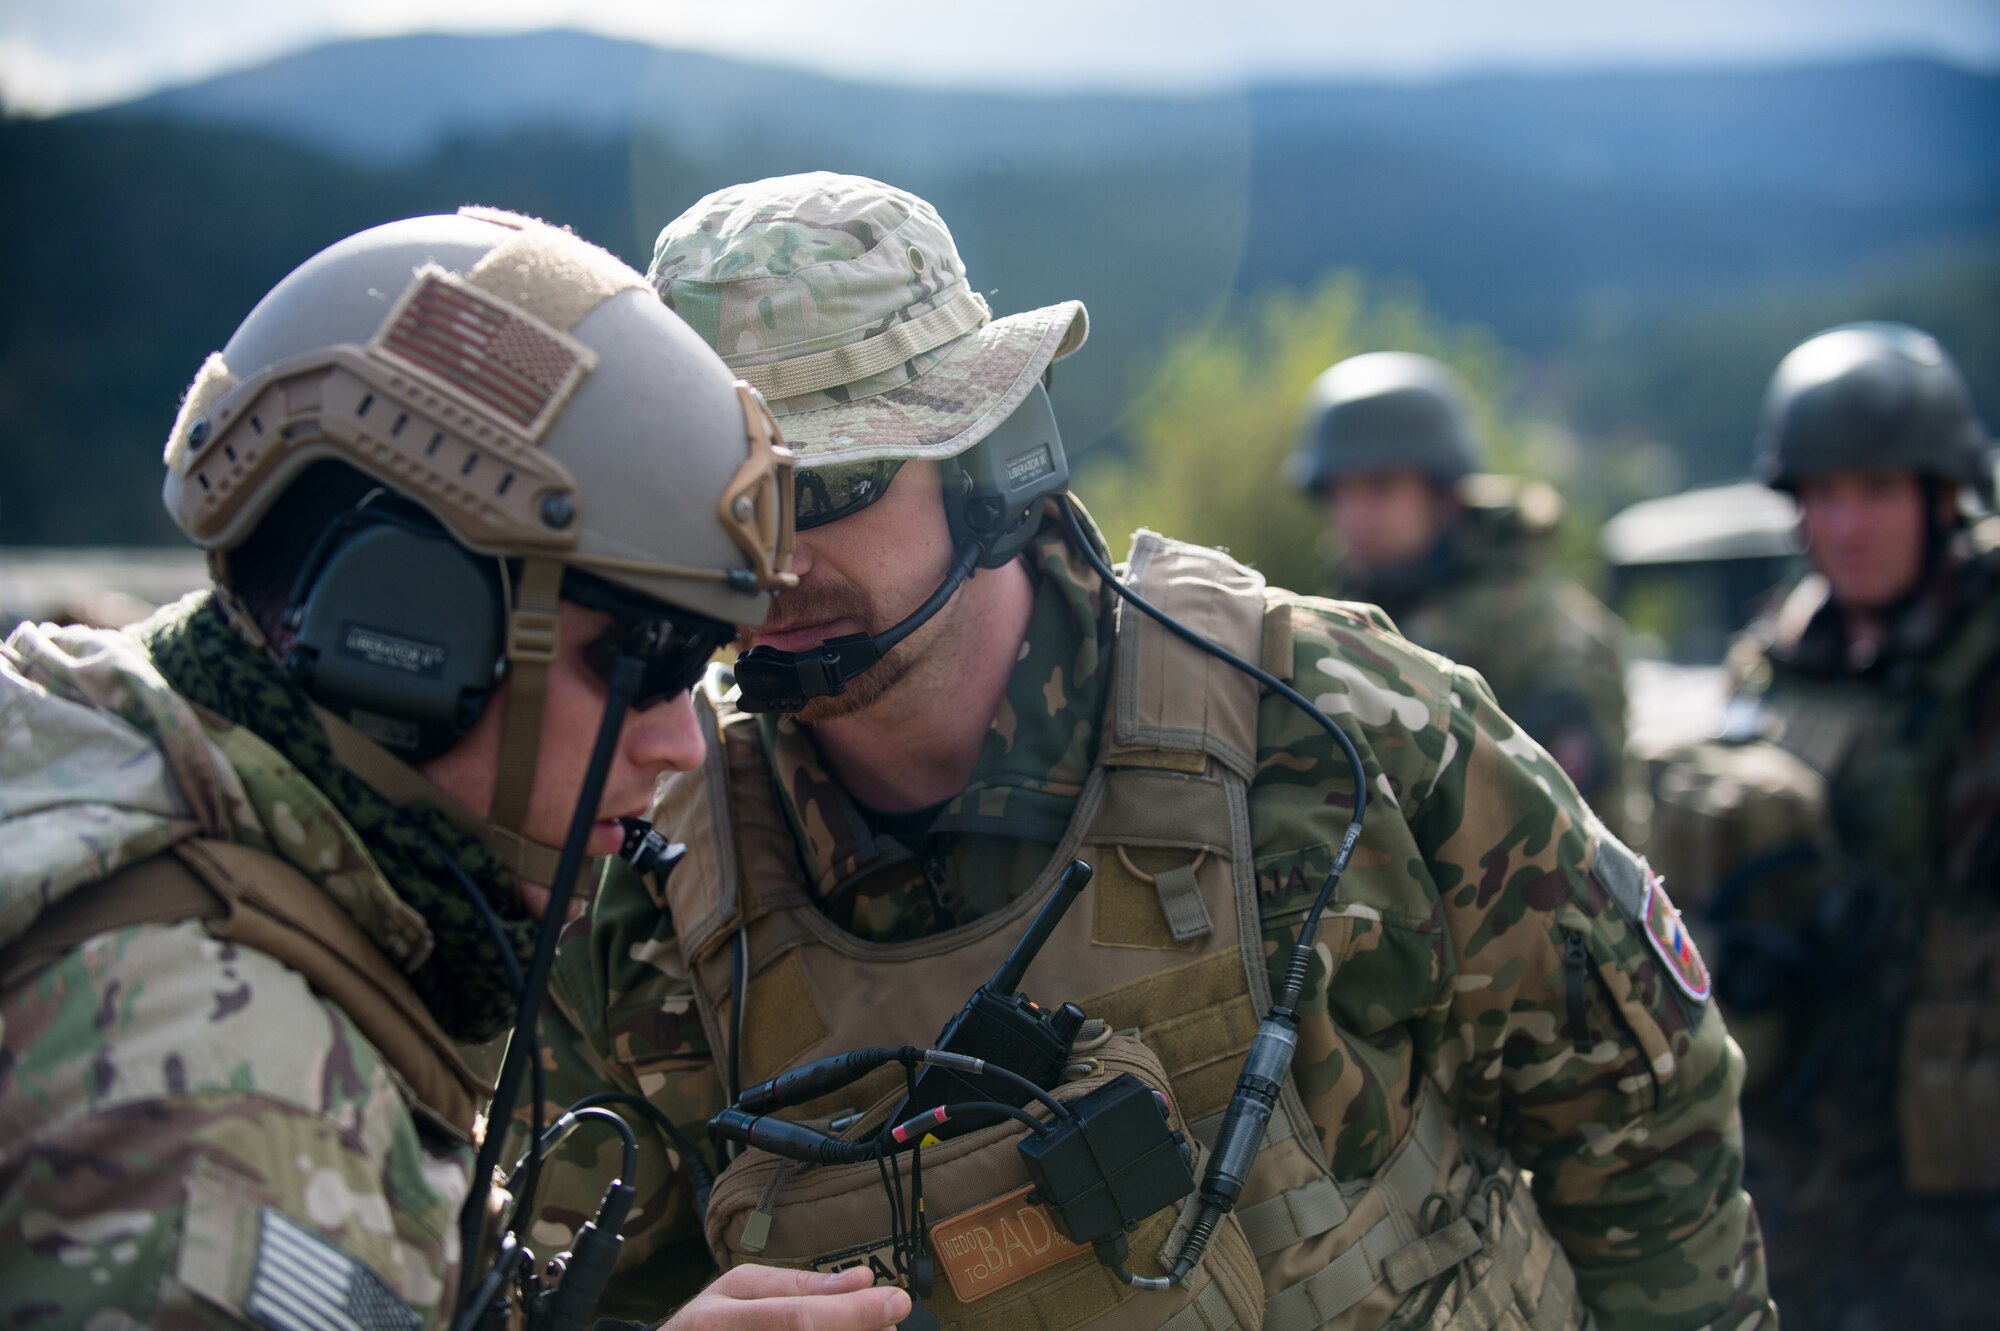 A Slovenian air force joint terminal attack controller, speaks with U.S. Air Force Senior Airman Brian Smith, 2nd Air Support Operations Squadron JTAC, after providing close air support during exercise Rock Proof V Oct. 16, 2015, at Pocek Training Range, near Postojna, Slovenia,. JTACs provide accurate, timely and relevant environmental situational awareness for units across a variety of operations. (U.S. Air Force photo/Staff Sgt. Armando A. Schwier-Morales)